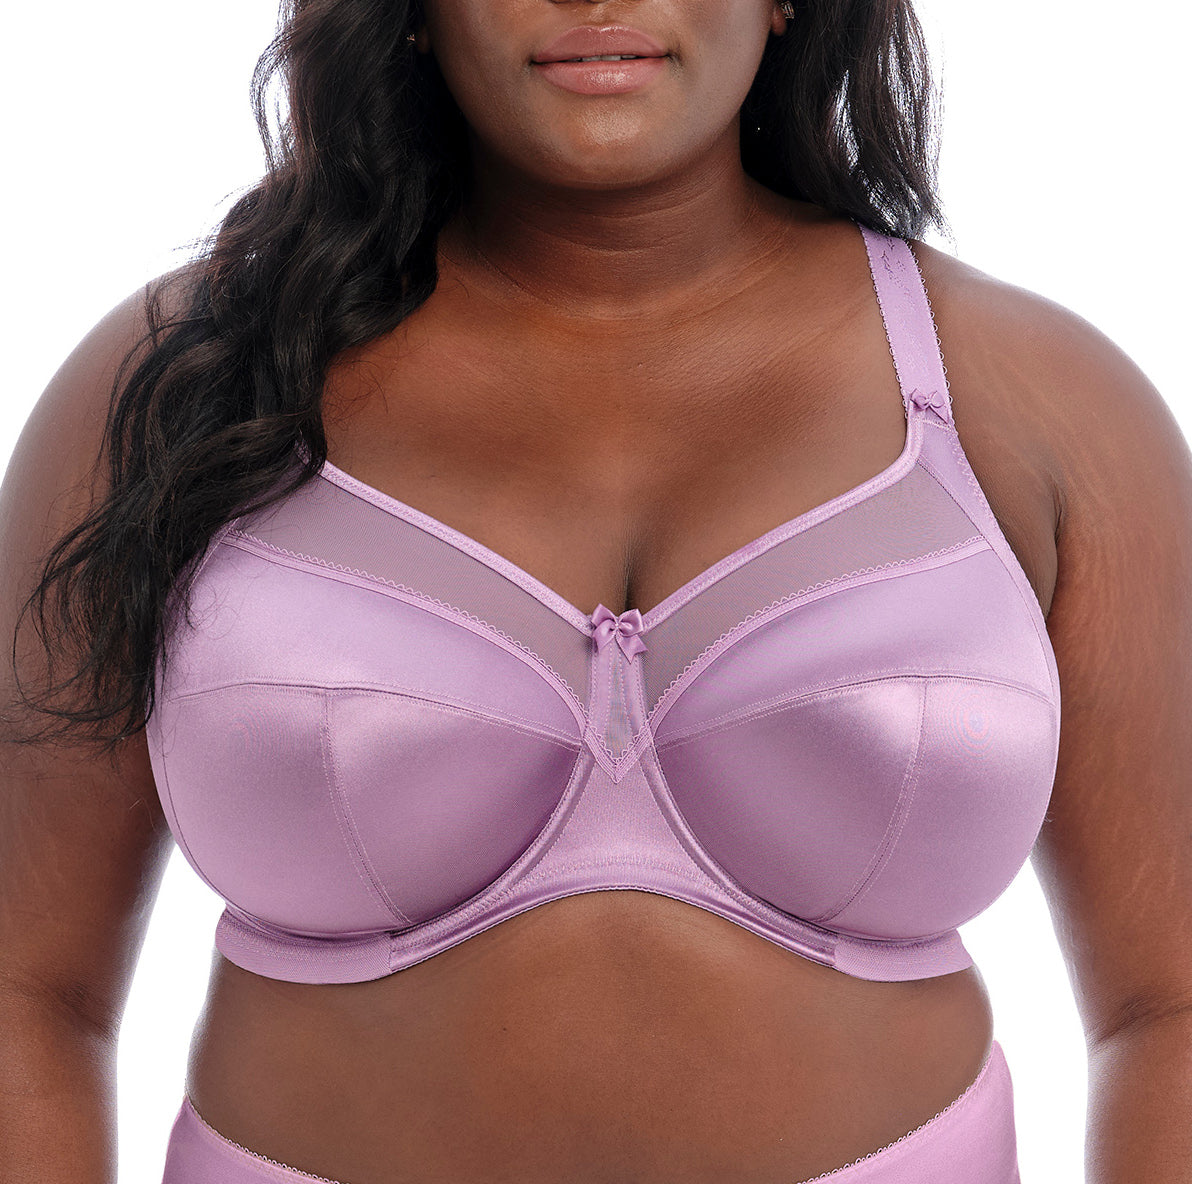 Broad Lingerie - The Goddess Kiera in Pink Nectar is so lovely it